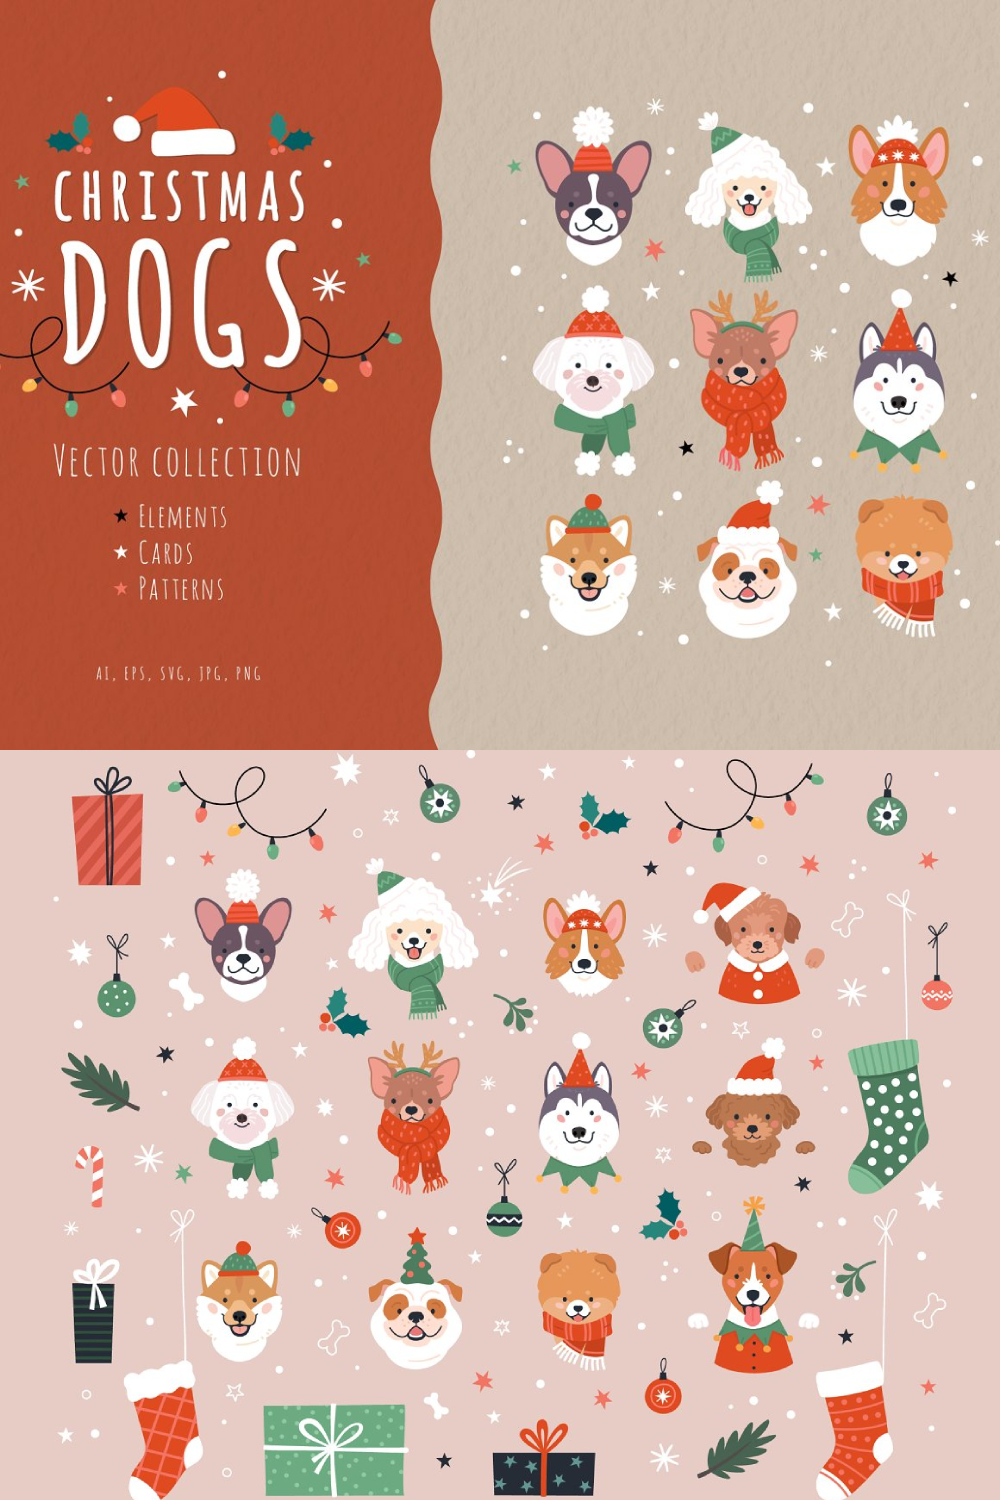 Christmas Dogs Vector Collection - Pinterest.